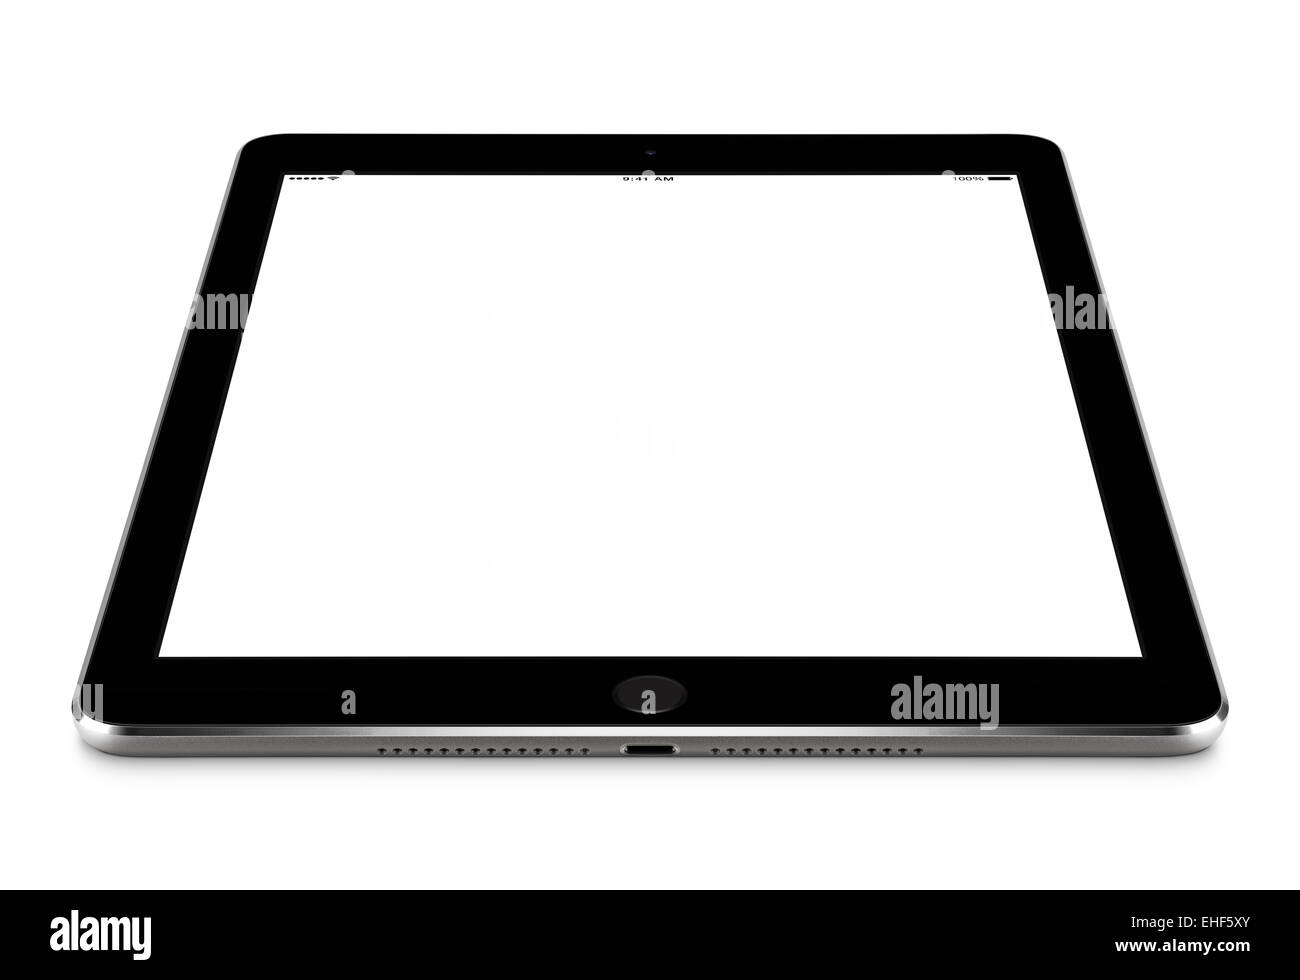 Angled front view of black tablet computer with blank screen mockup on the surface, isolated on white background. Stock Photo